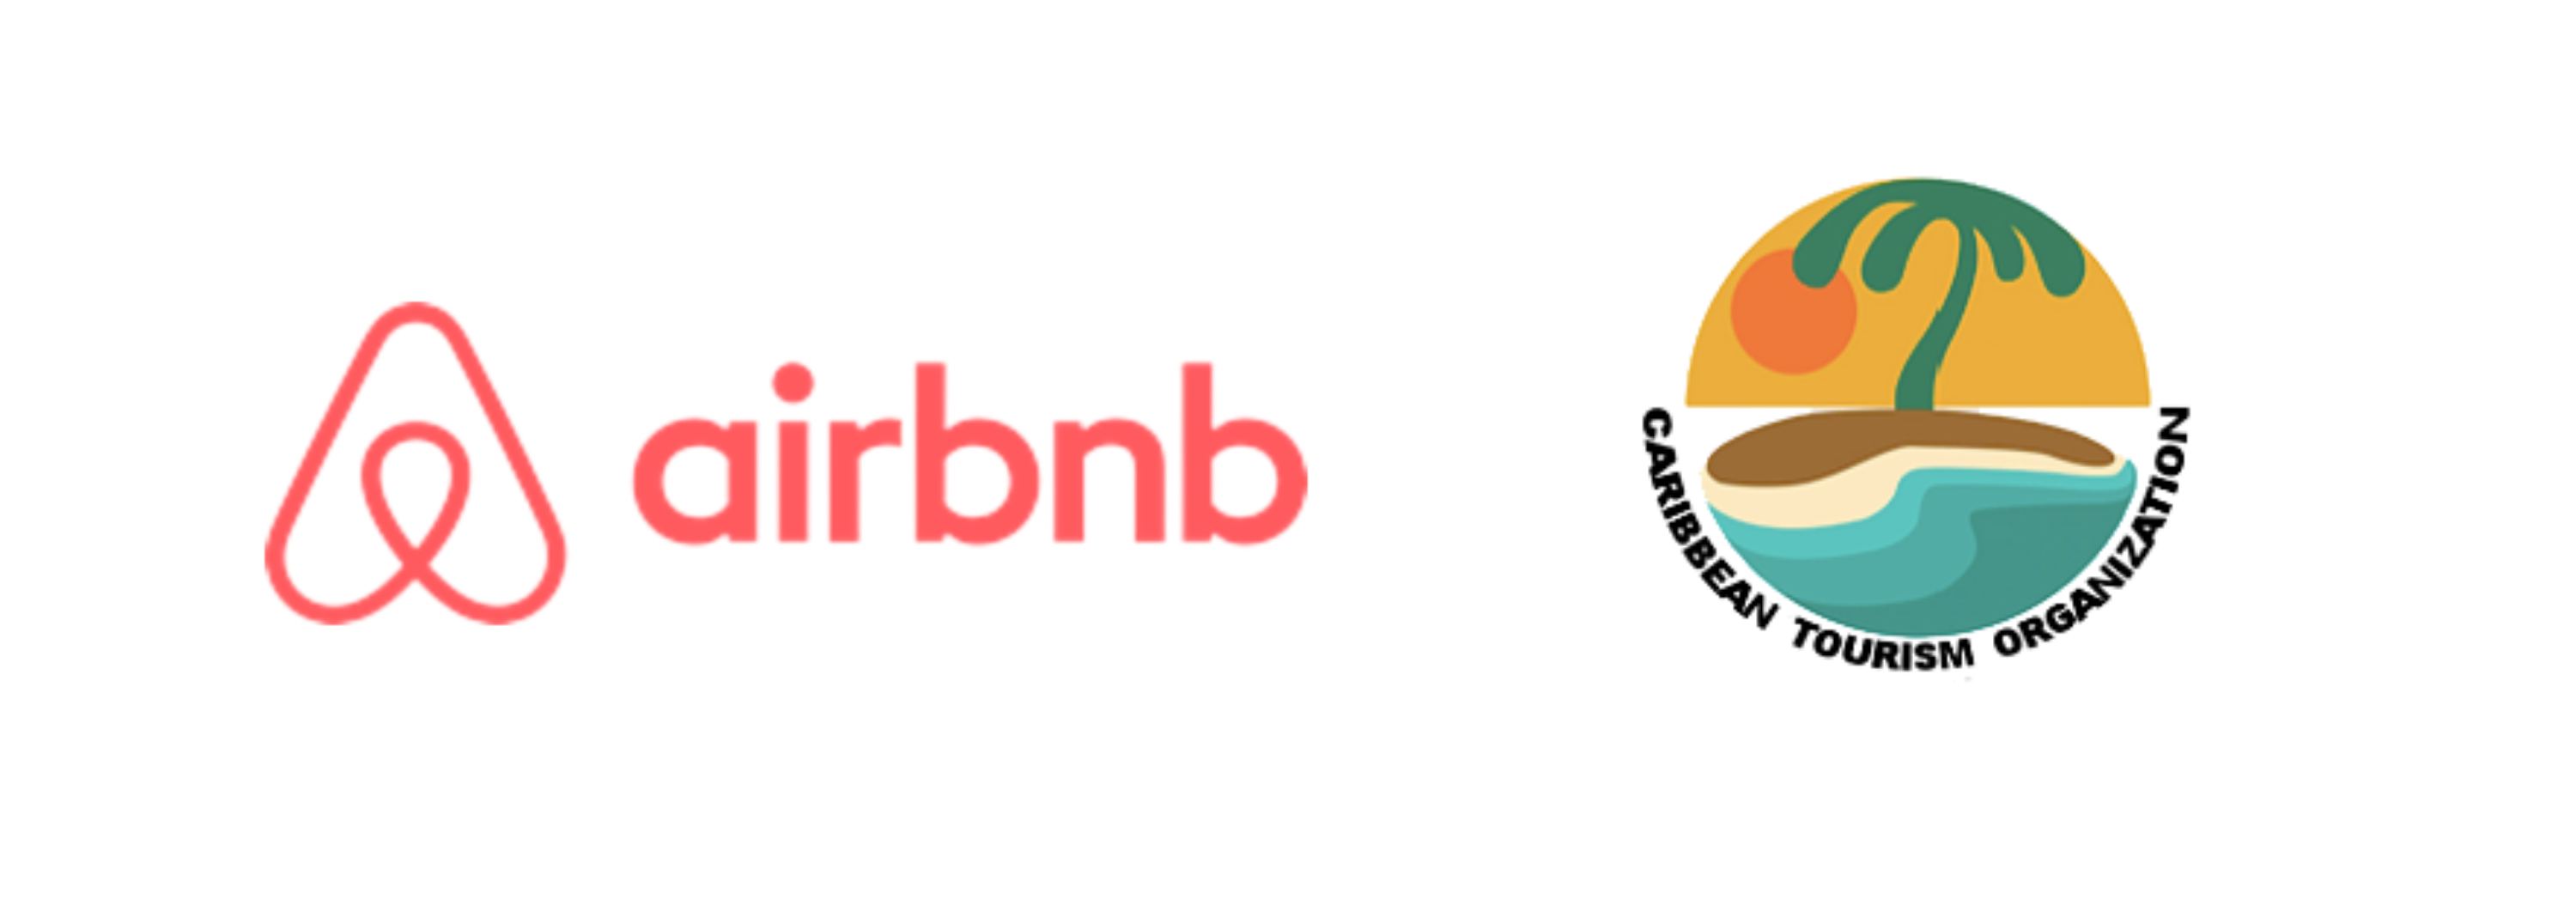 airbnb and cto logo